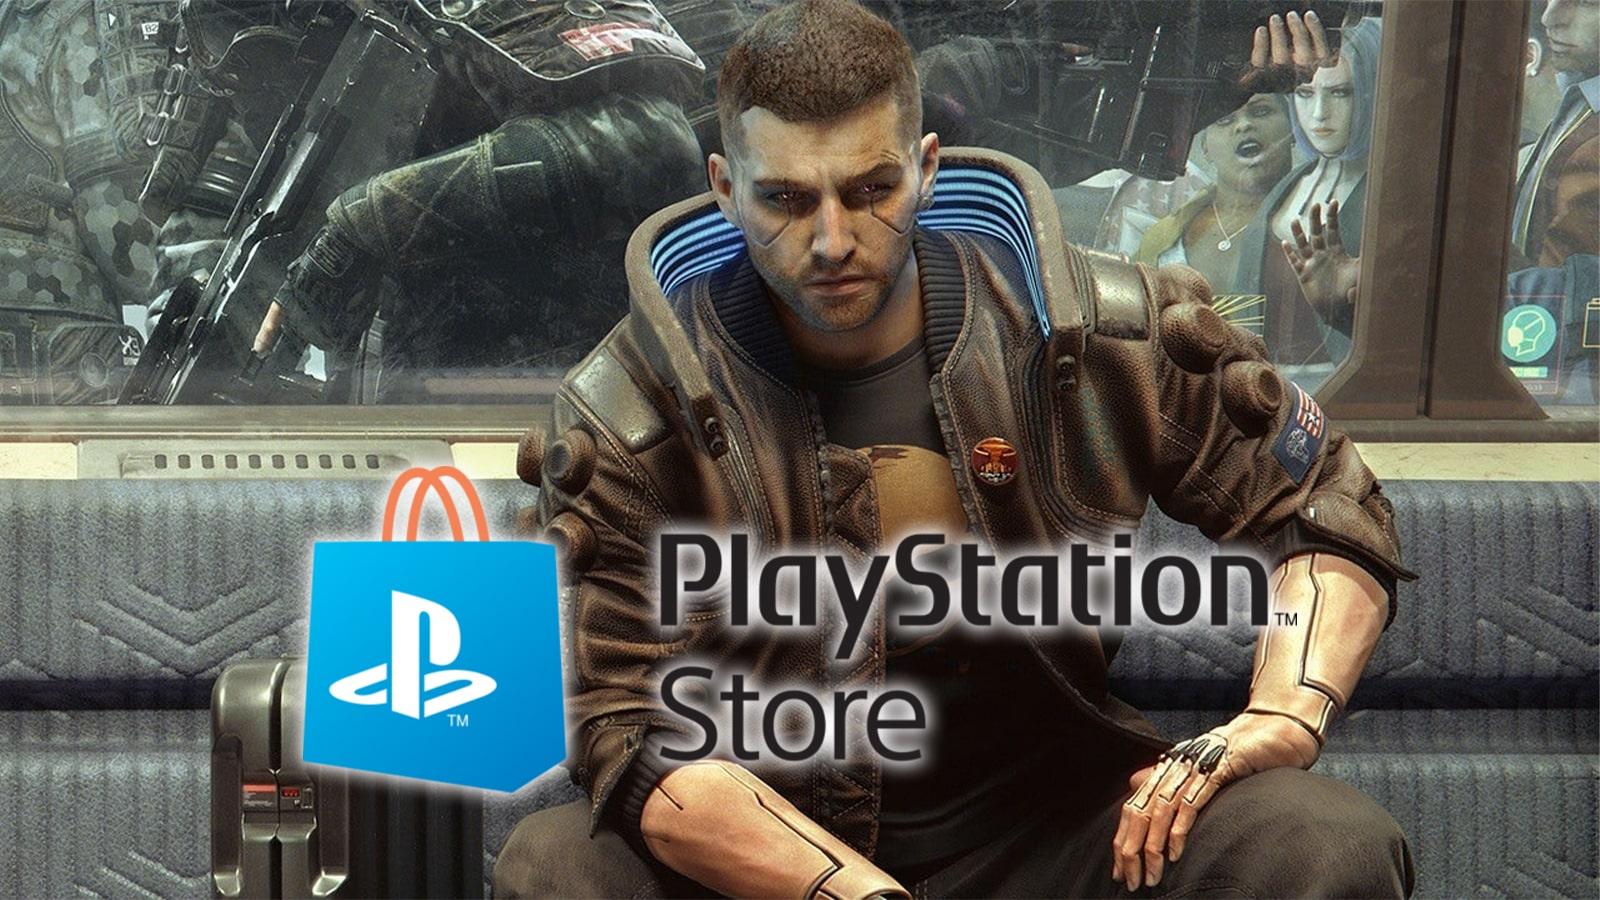 Cyberpunk 2077 for PS5 spotted in the PlayStation Store